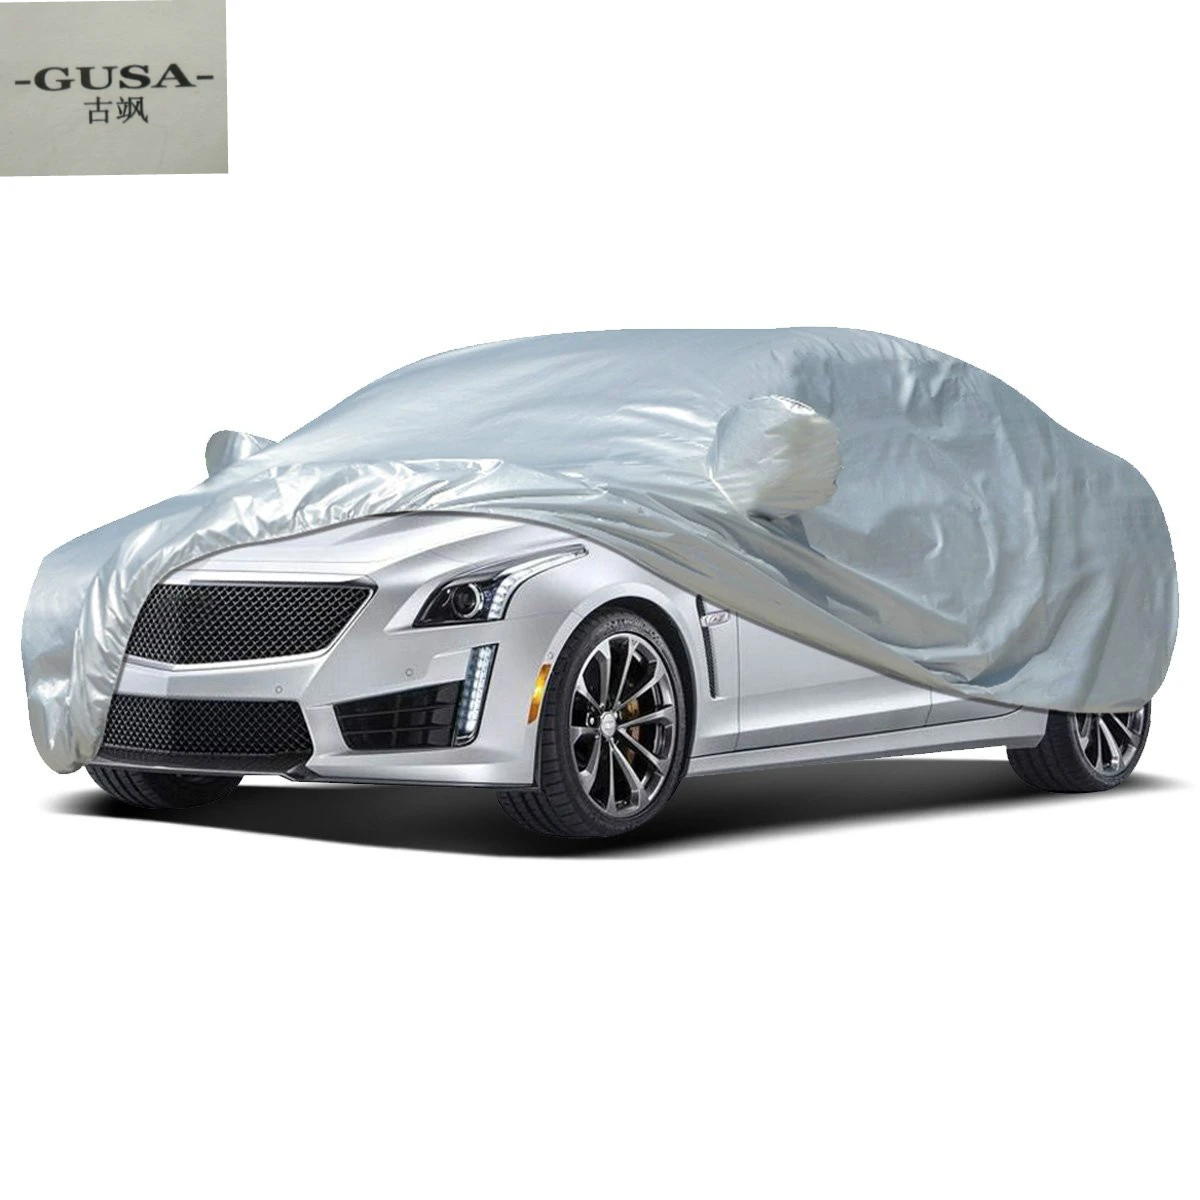 Tire Cover Car Covers For Honda Civic Waterproof Car Covers Snow Ice Dust Sun UV Dust Rain Shade Cover Auto Car Outdoor Protector Cover best car sun shade